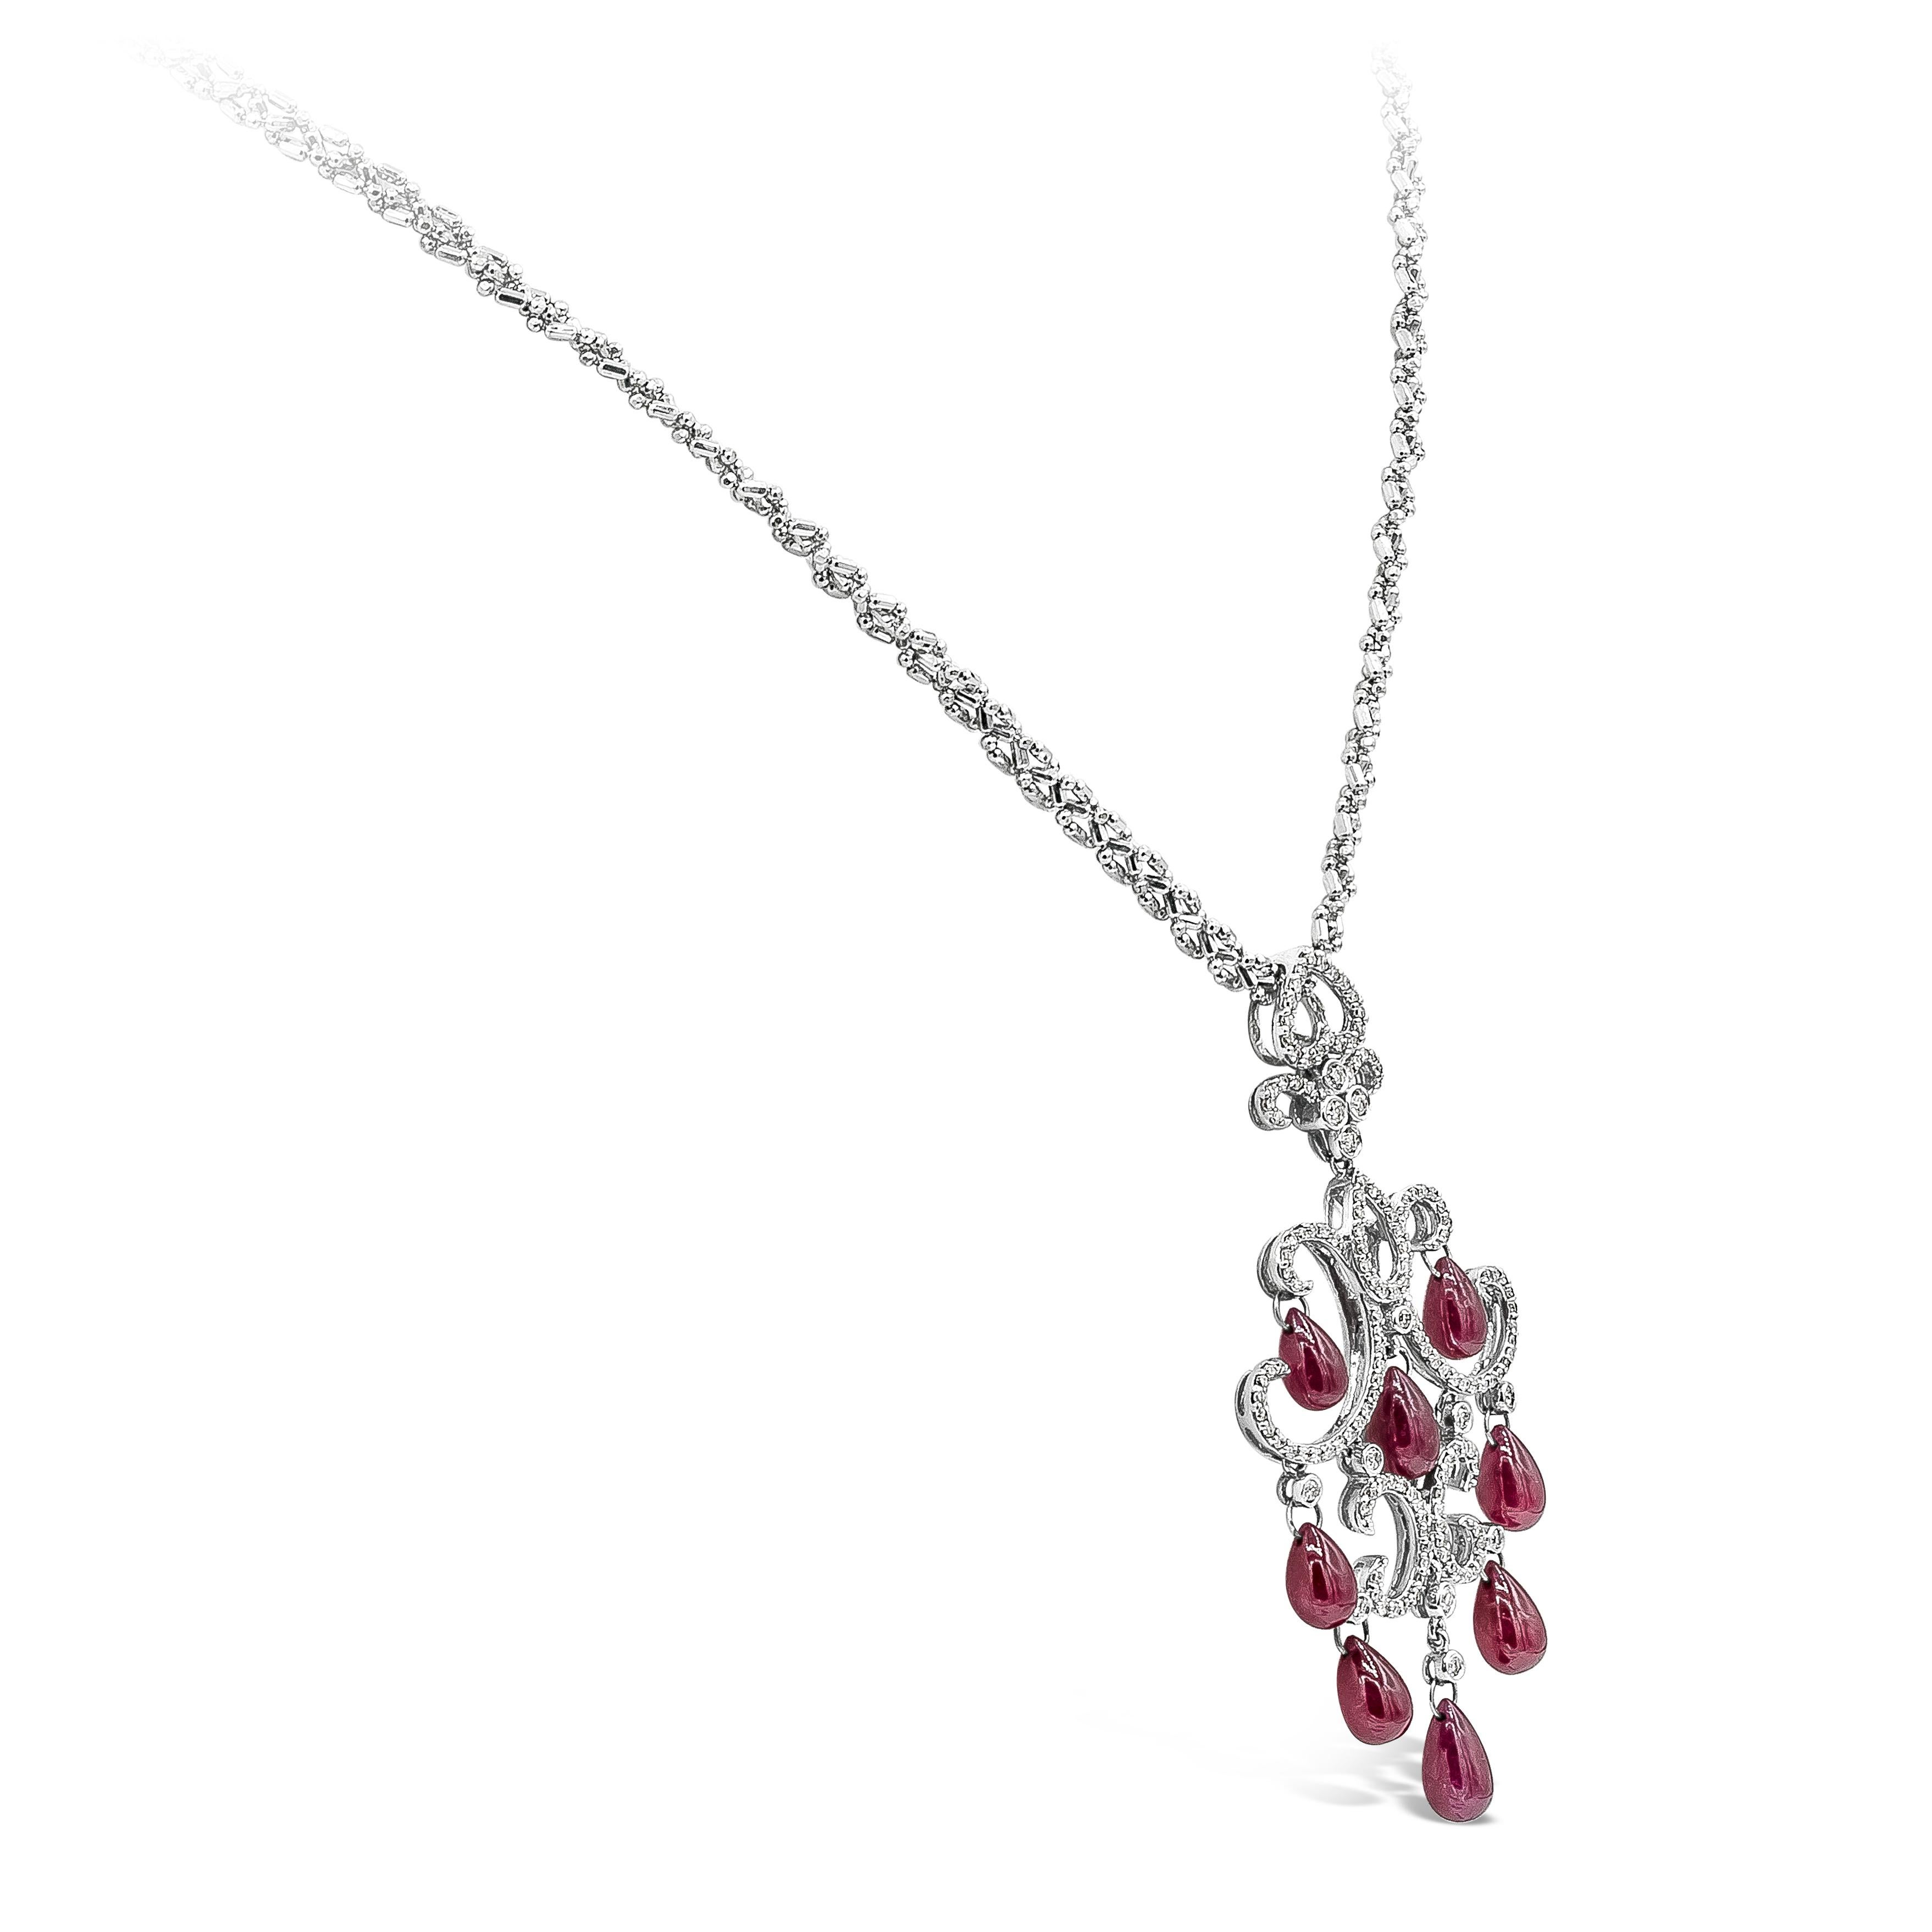 An intricately designed piece encrusted with round brilliant diamonds weighing 0.80 carats total. Finished with color-rich ruby briolettes weighing 16.25 carats total. Pendant length of 2.5 inches and chain length of 19 inches.
